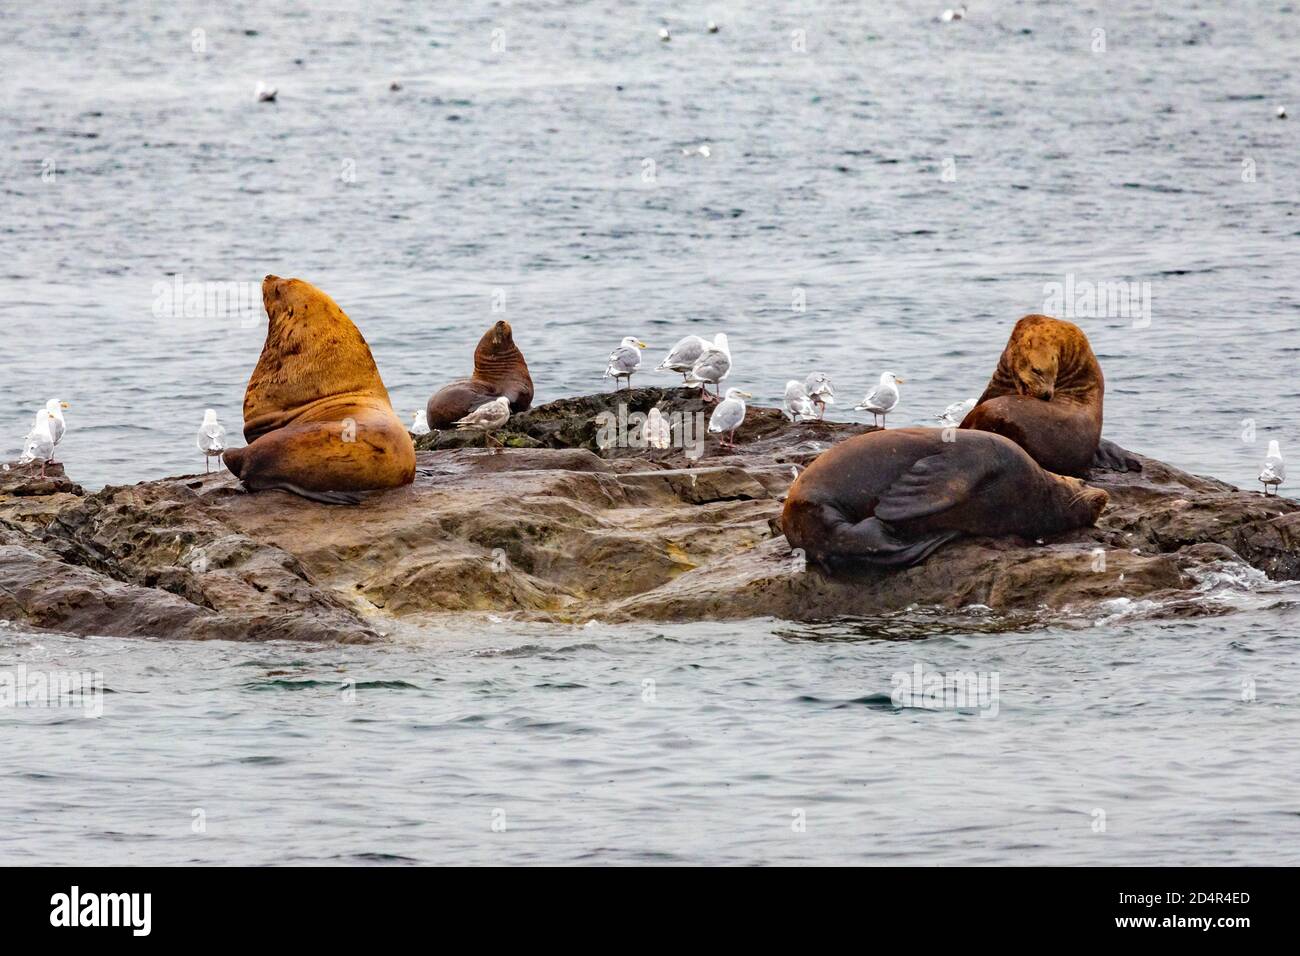 Steller sea lions from gulf of alaska Whittier cruise view Stock Photo